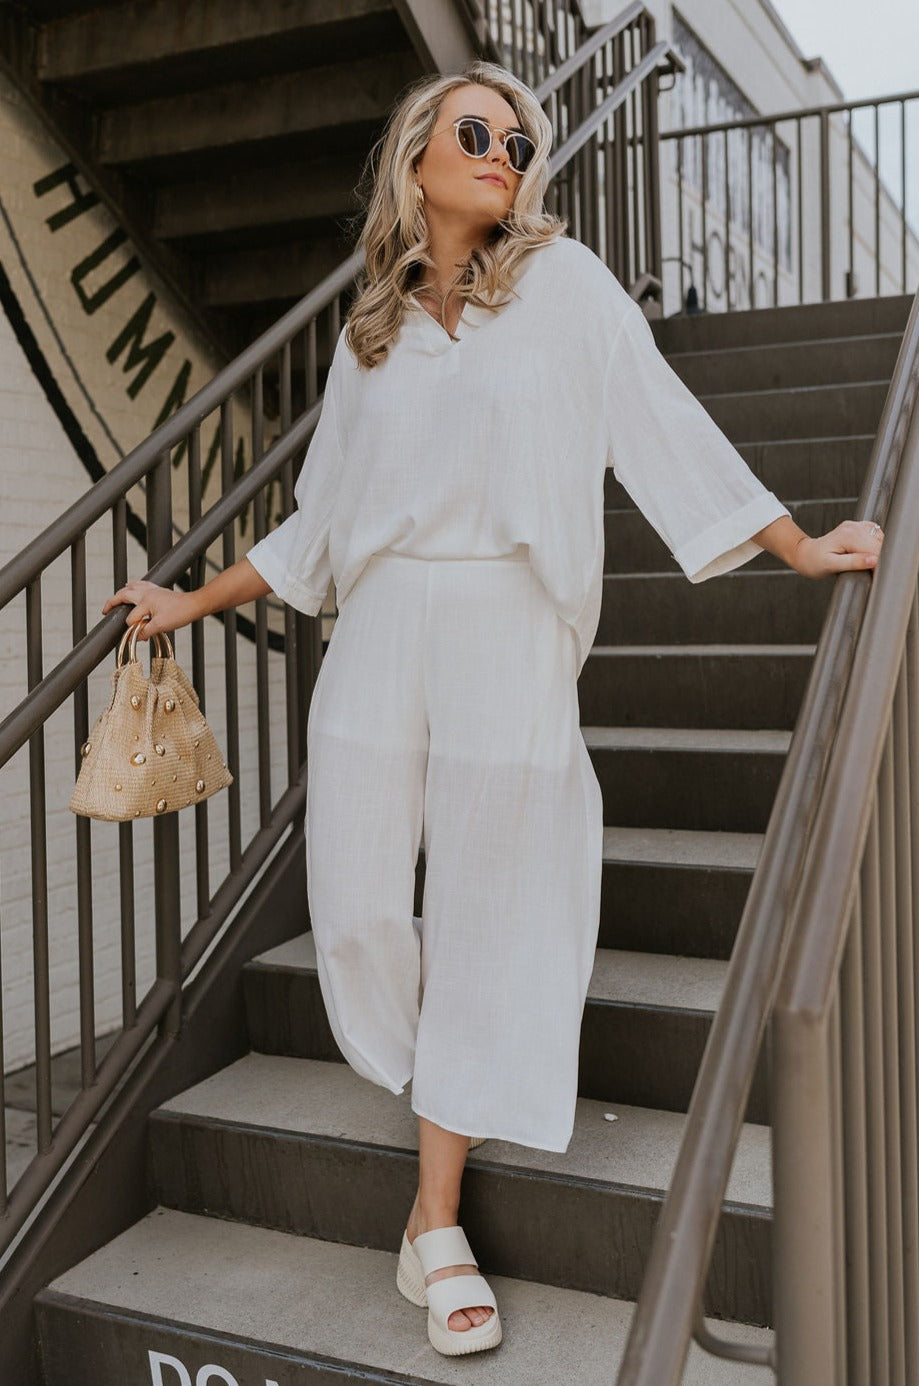 Full body view of female model wearing the ONA Streetworks Slide Heel Sandal in in Honey White & Sea Salt which features Cream Leather Lightweight Upper, Two Thick Straps, Slide-On Style, Traction Rubber Sole and 3" Heel, 1 1/14" Platform